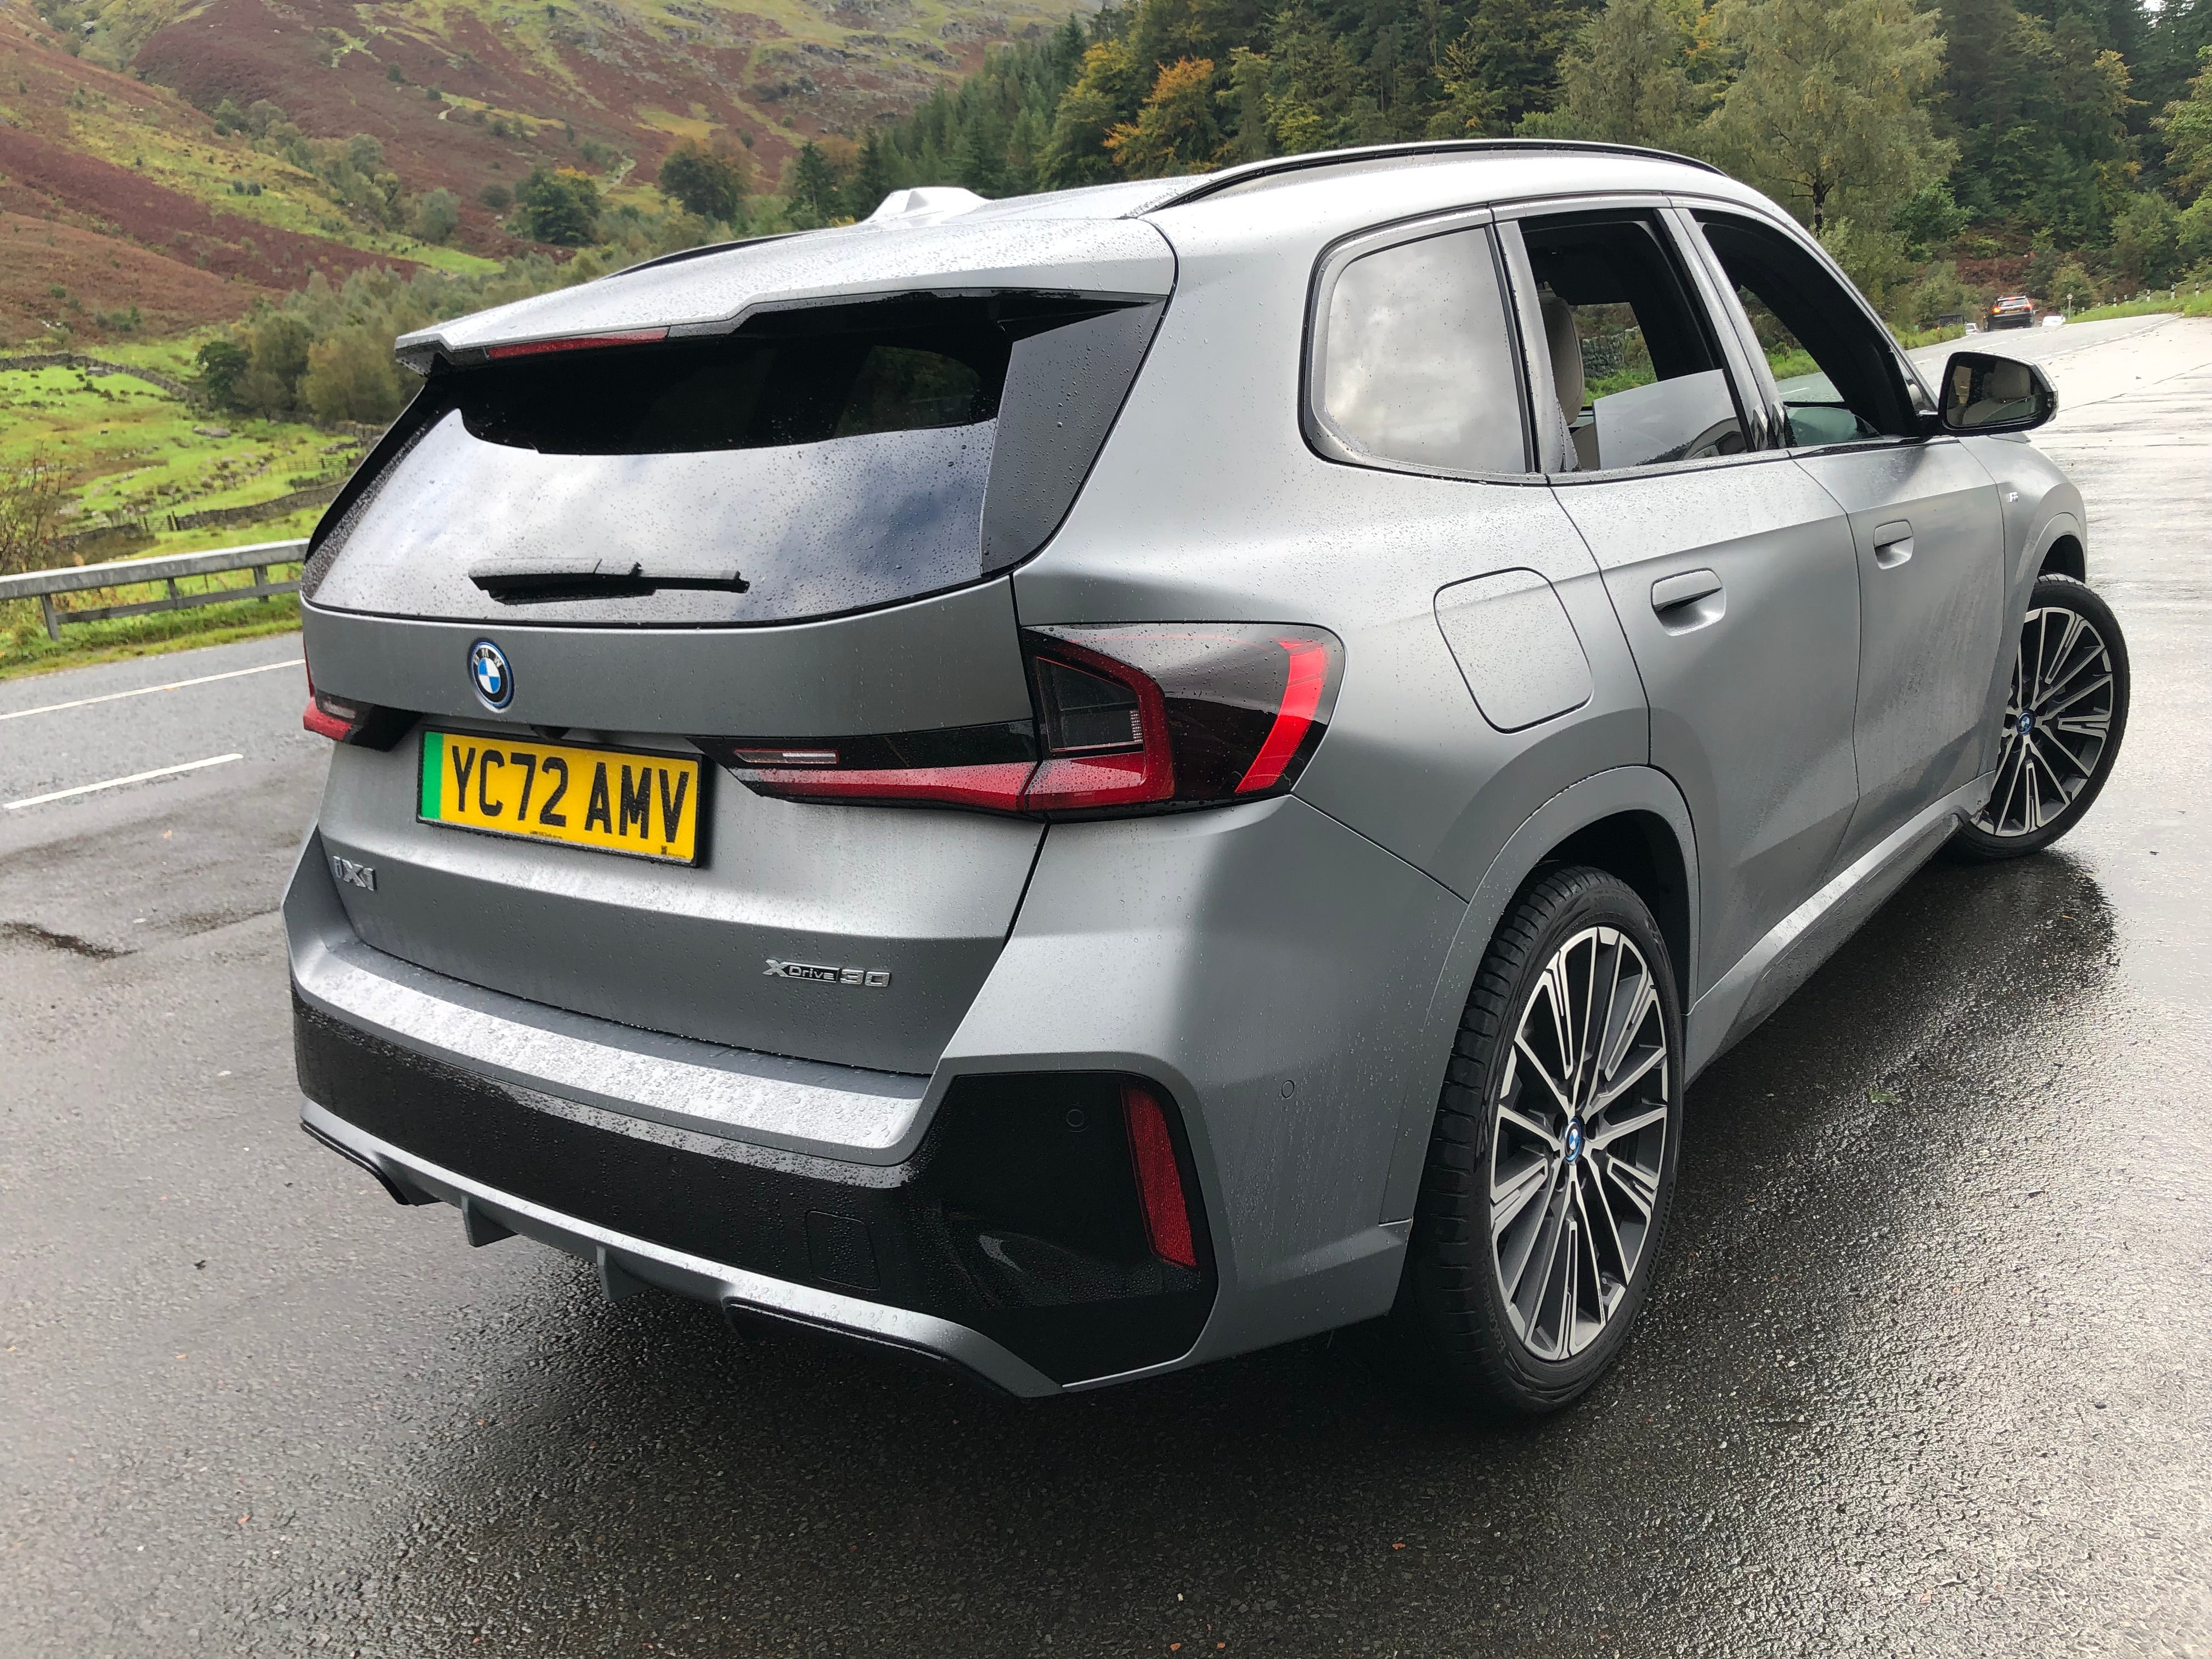 The iX1 has performance that would have only been found on BMW’s M Sport derivatives a few years ago, and now it’s taken for granted